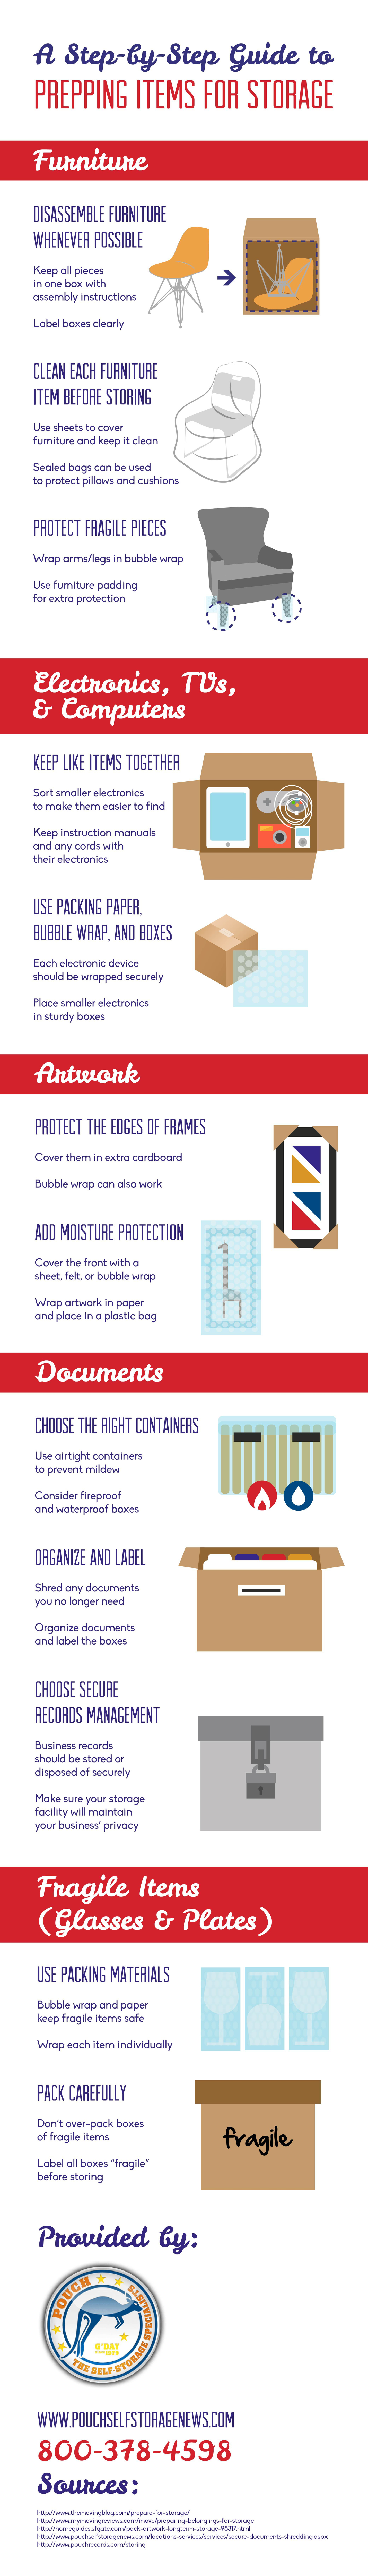 A Step-by-Step Guide to Prepping Items for Storage [INFOGRAPHIC]